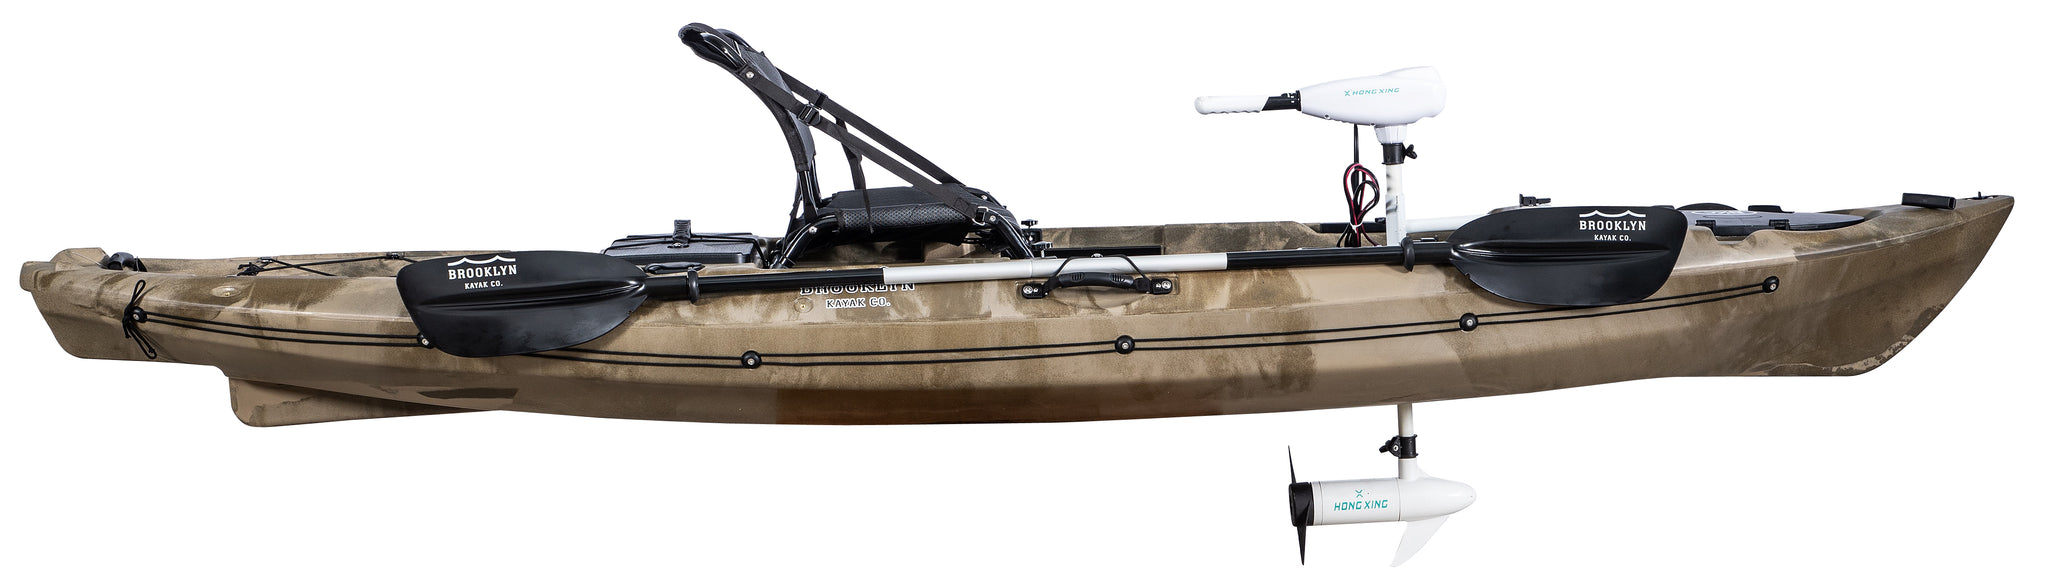 Baits & Lures - ProLINE Marine  Trolling motor sales and service, NuCanoe  kayak sales, Boat accessories sales, Bait & Lure sales in San Angelo, and  all of West Texas.